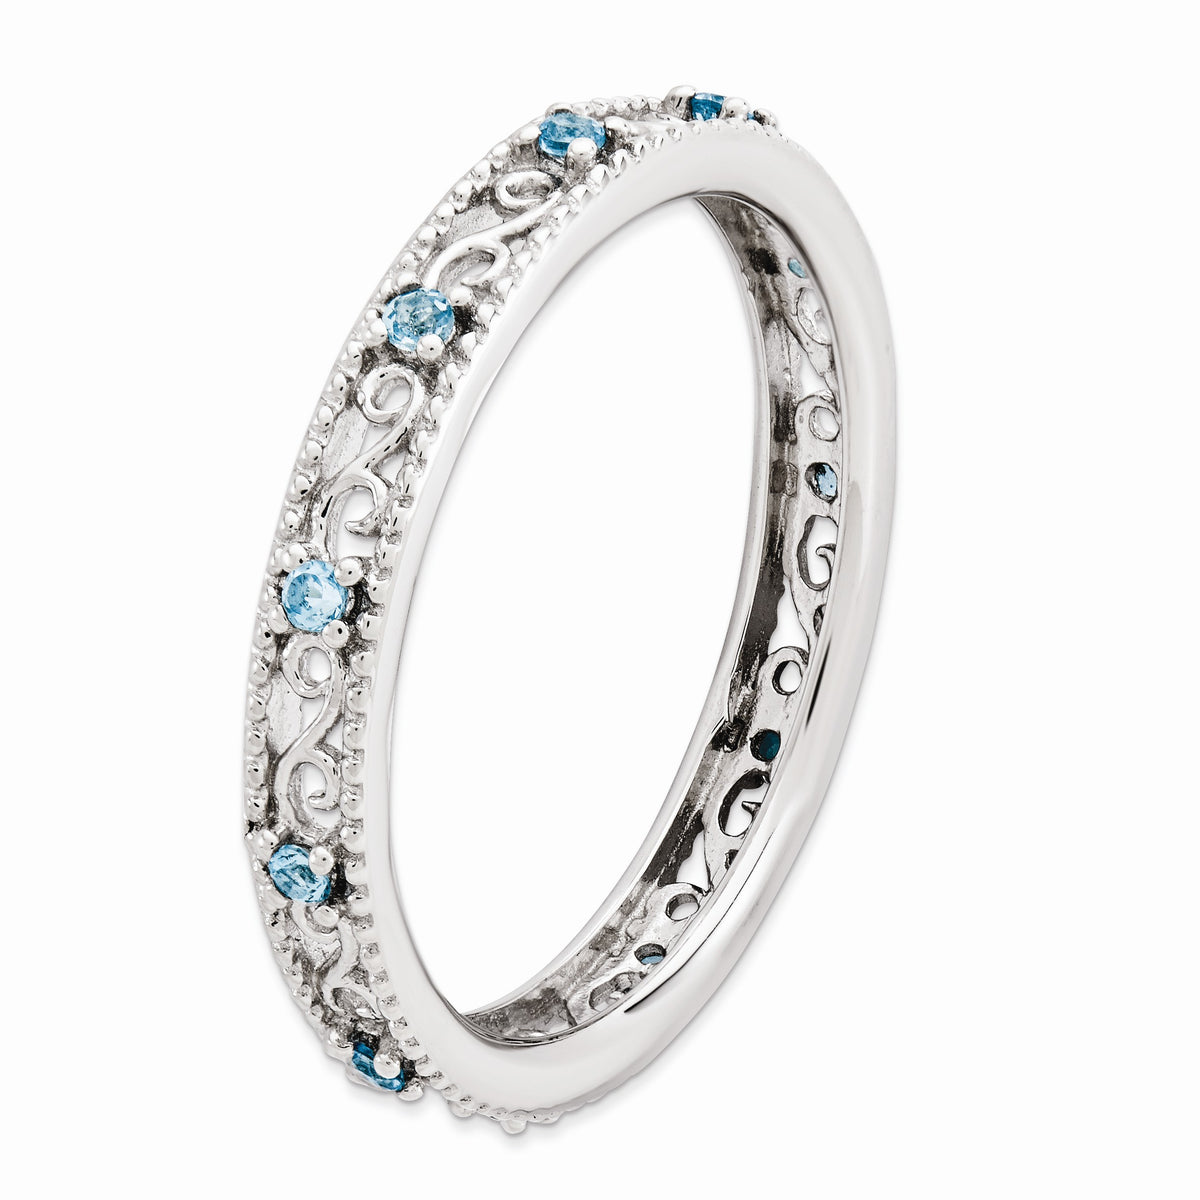 Alternate view of the 3mm Sterling Silver Stackable Expressions Blue Topaz Scroll Band by The Black Bow Jewelry Co.